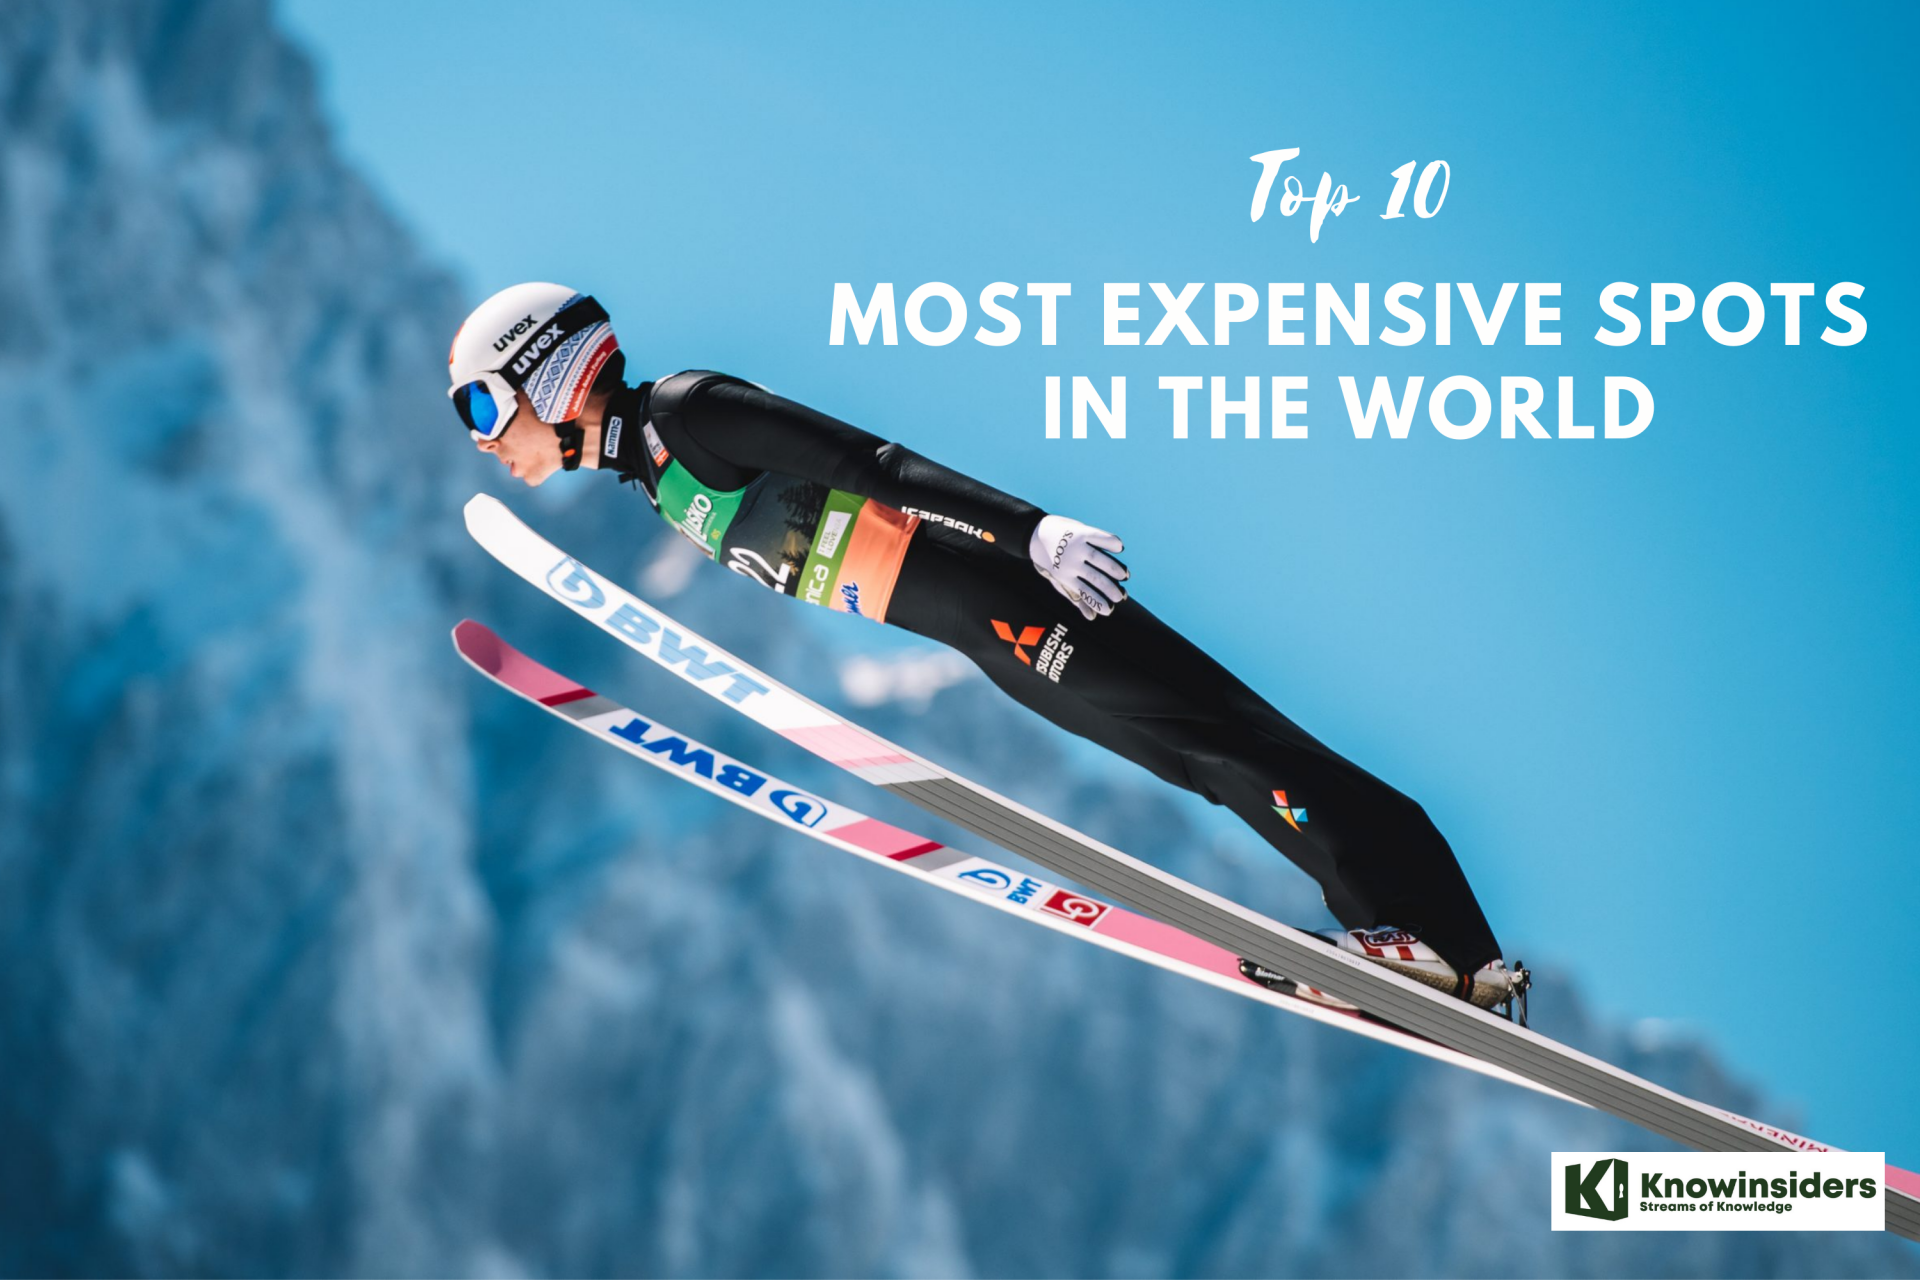 What is the most expensive sport?